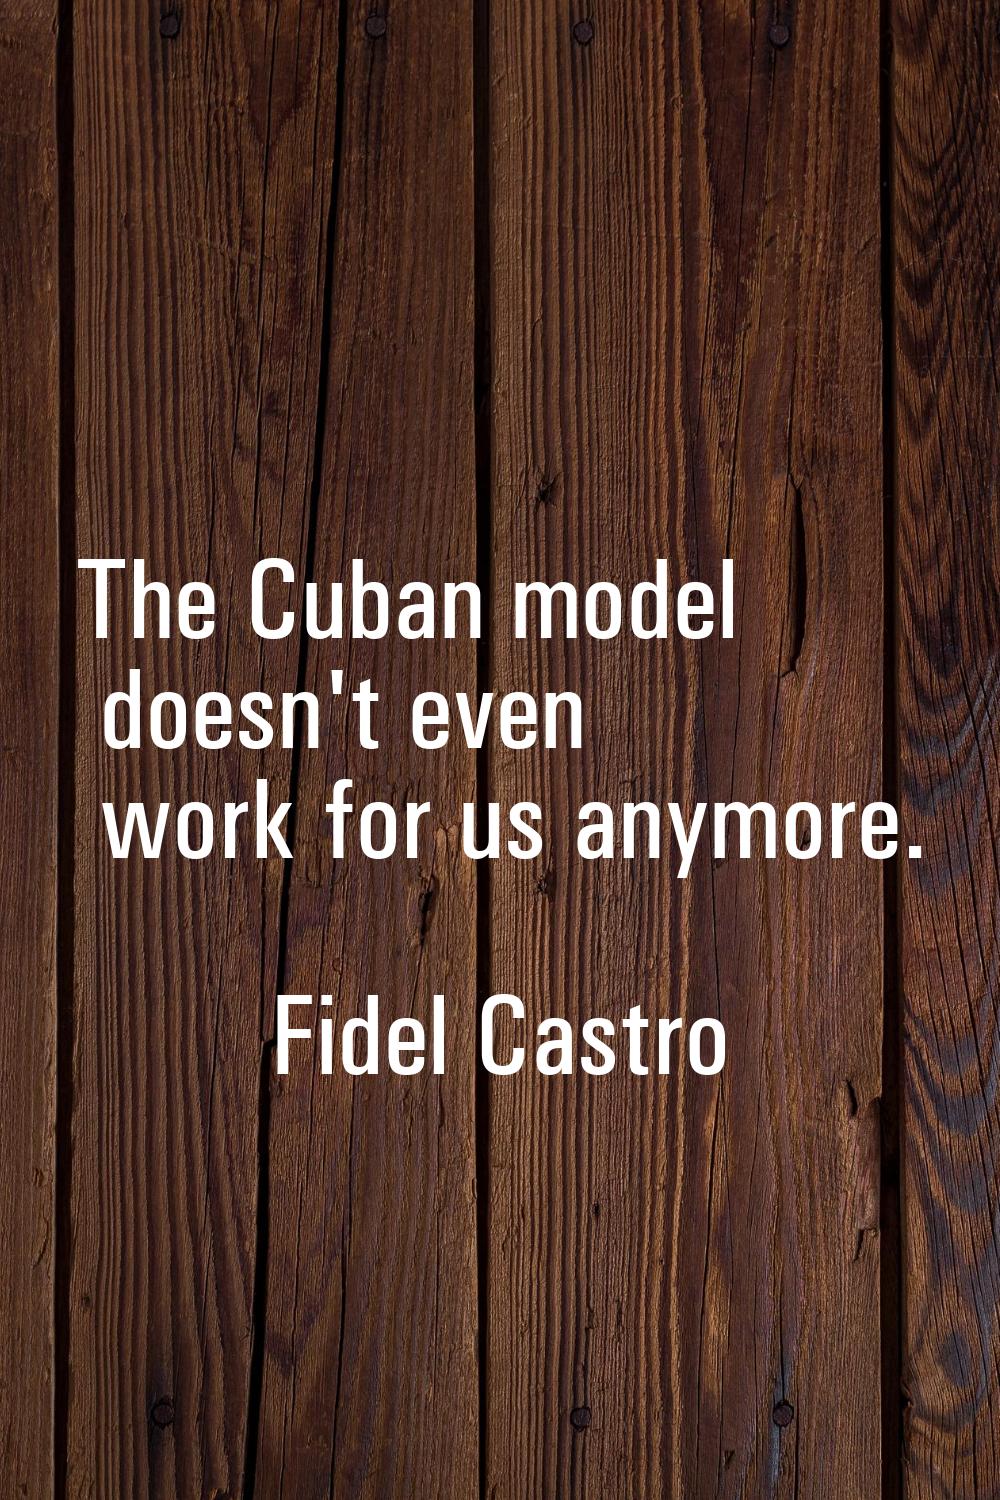 The Cuban model doesn't even work for us anymore.